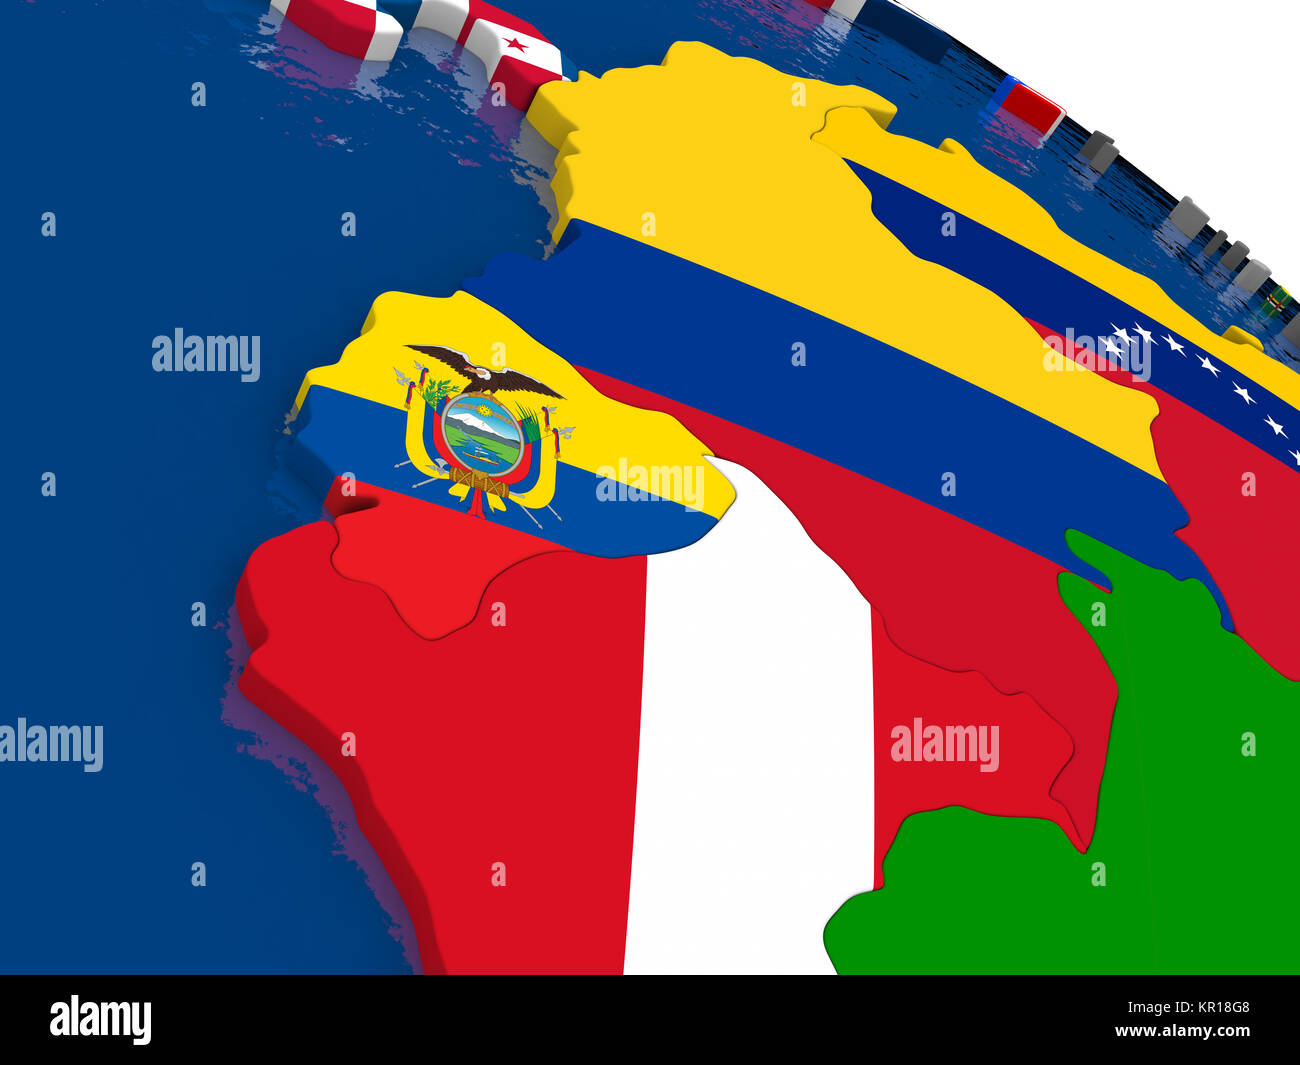 Ecuador on 3D map with flags Stock Photo